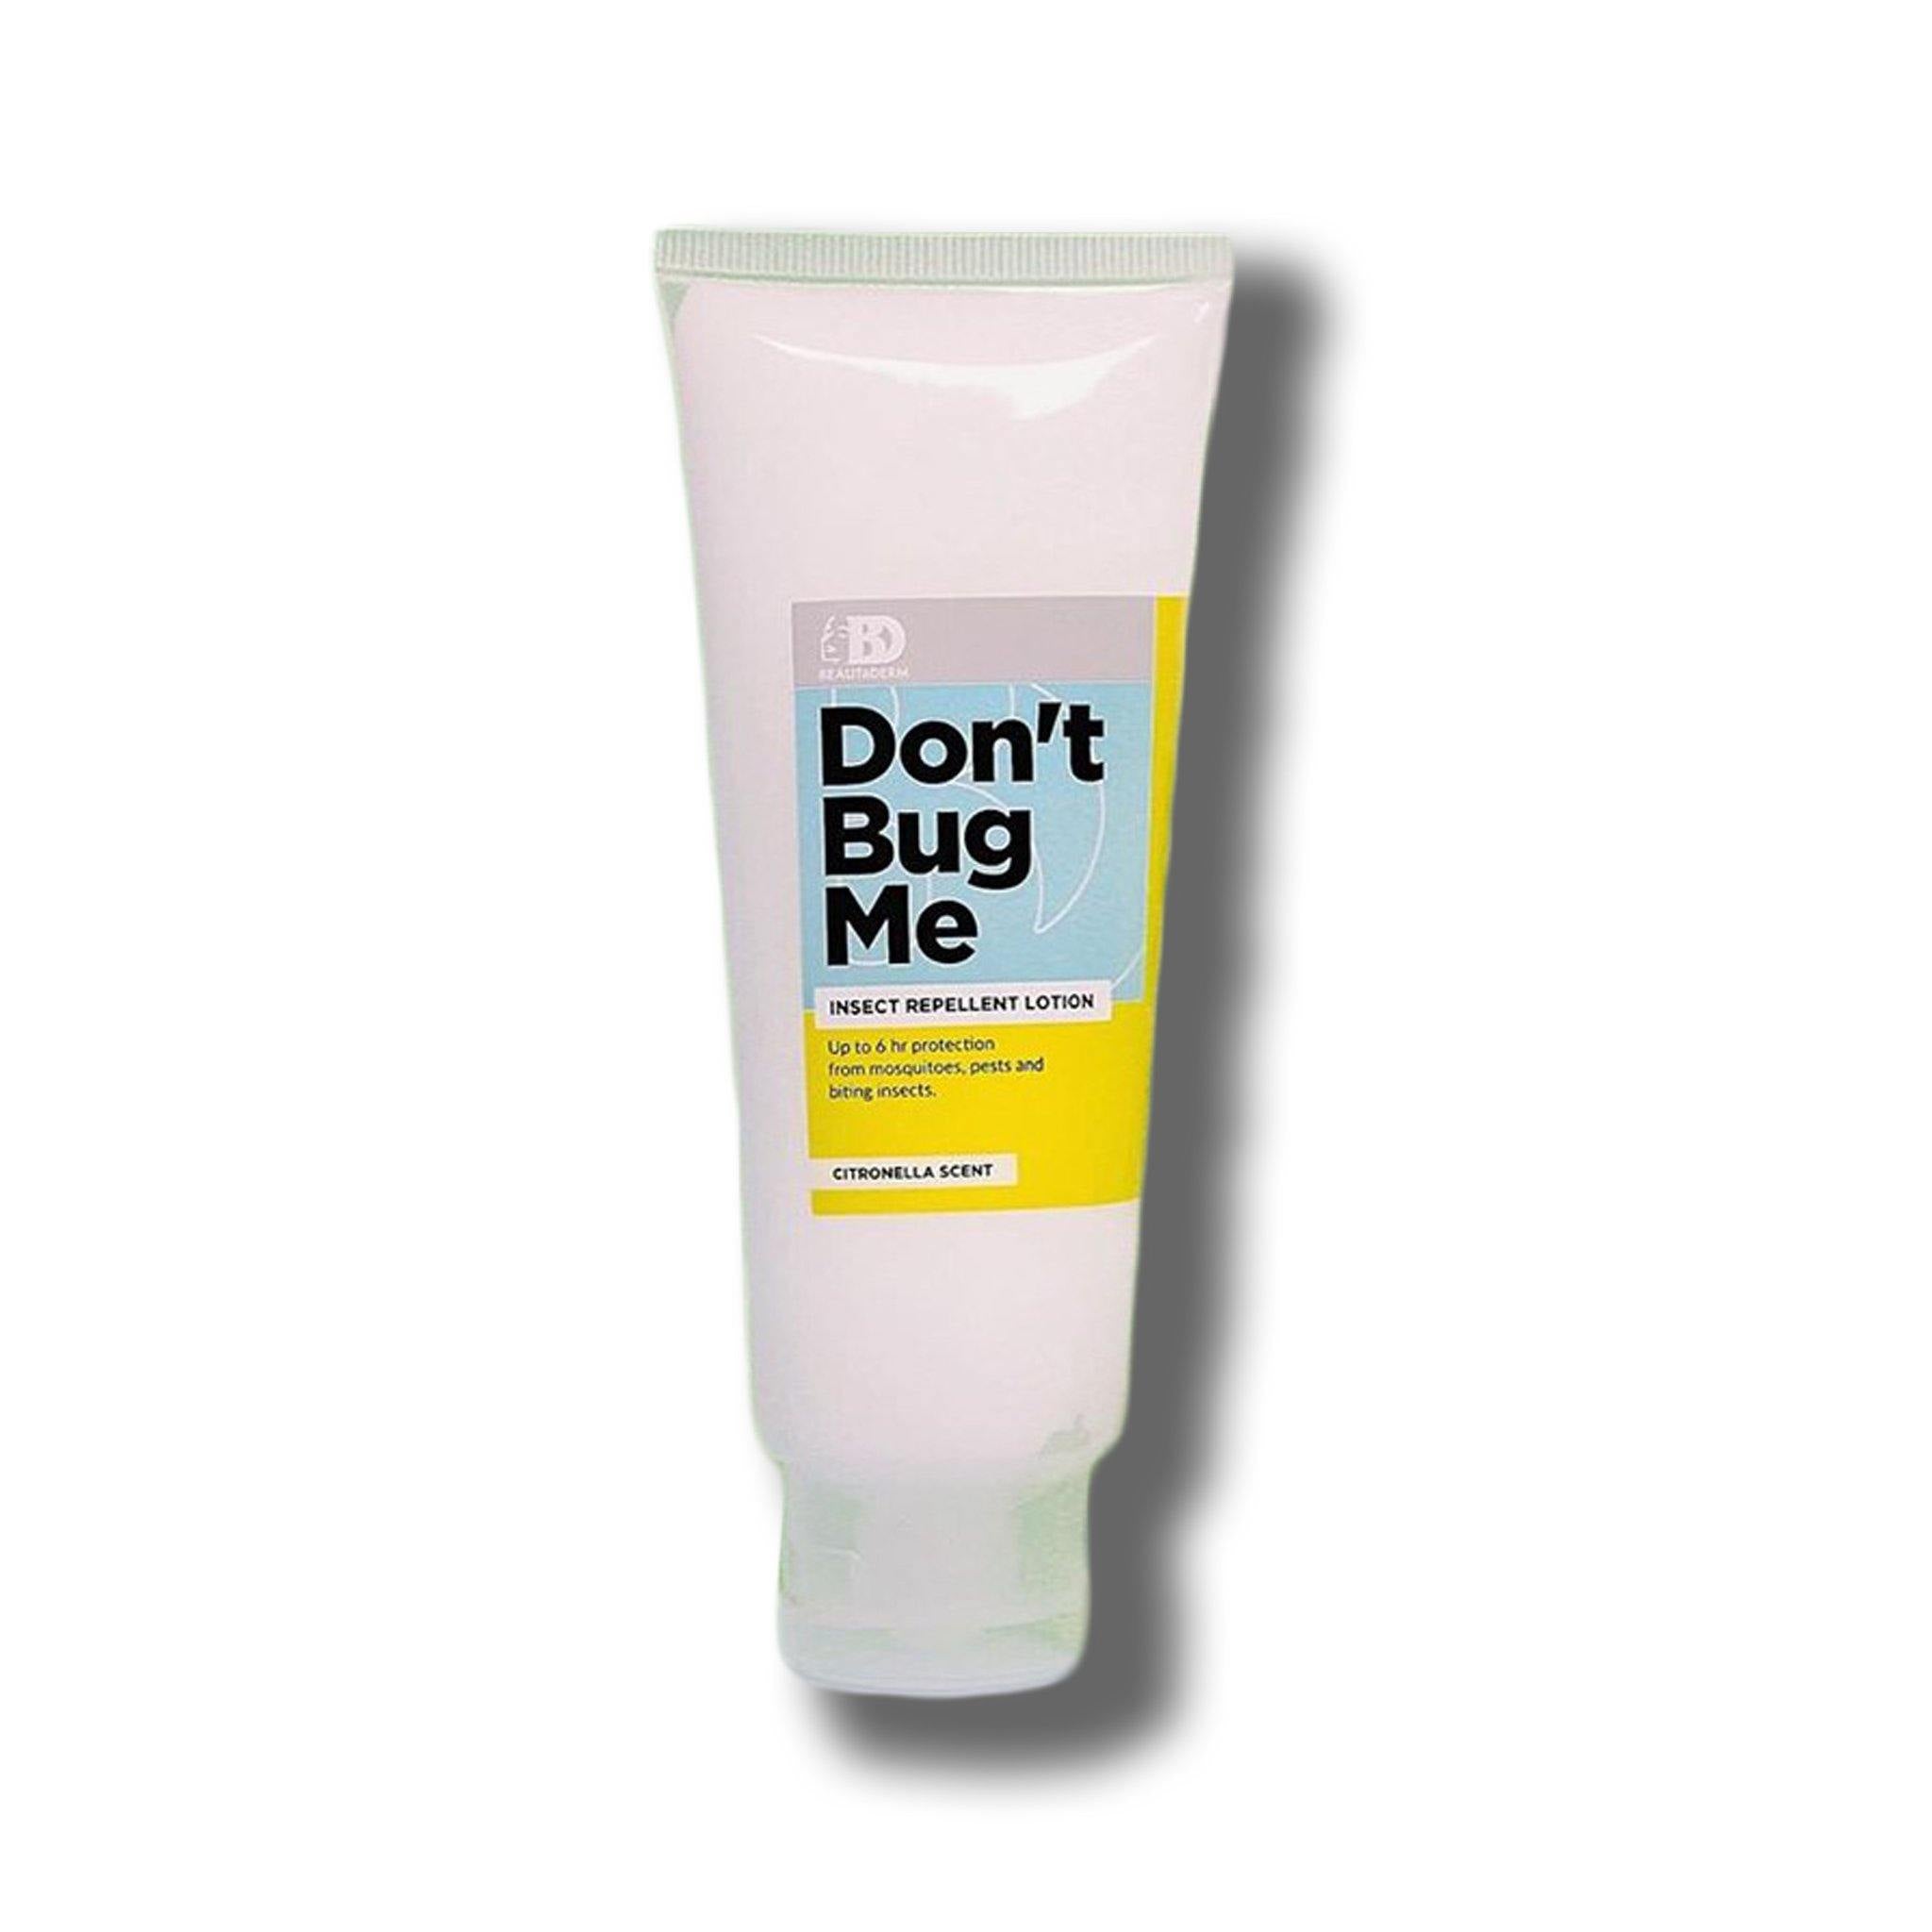 Don't Bug Me Insect Repellent Lotion, Citronella Scent, 100ml, by Beautederm